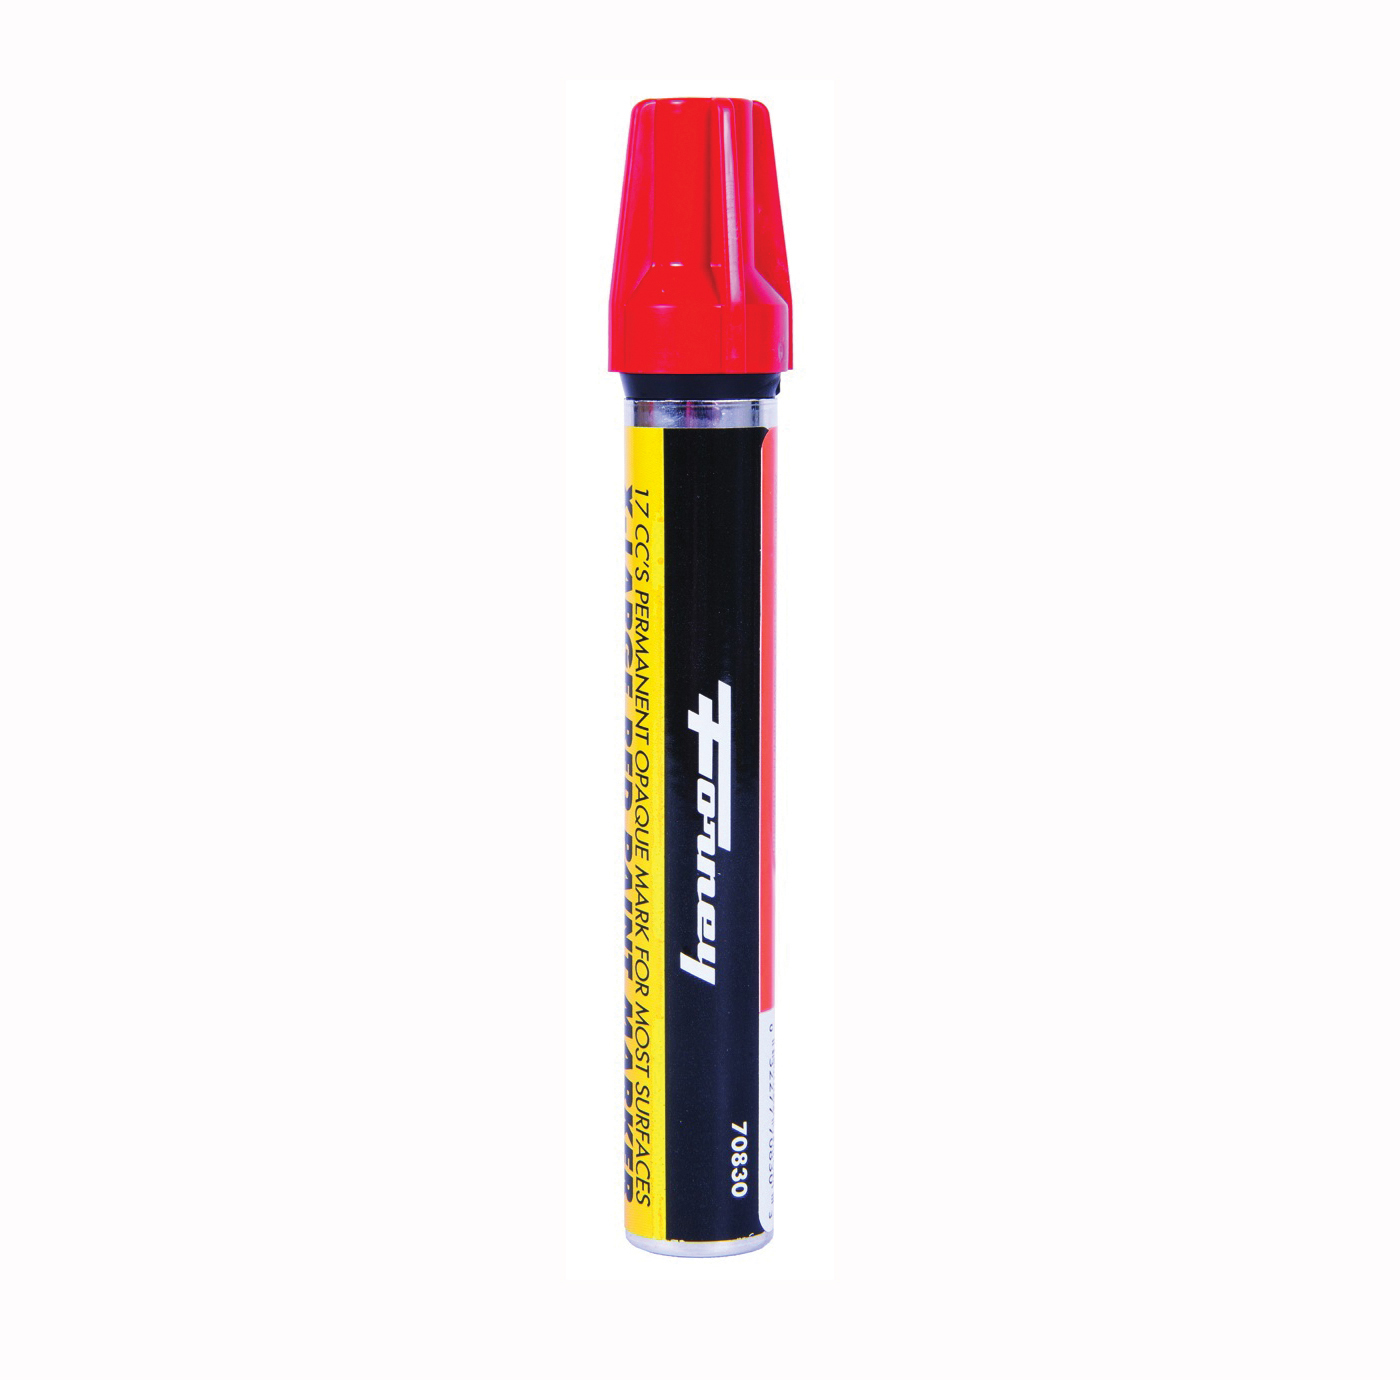 70830 Paint Marker, XL Tip, Red